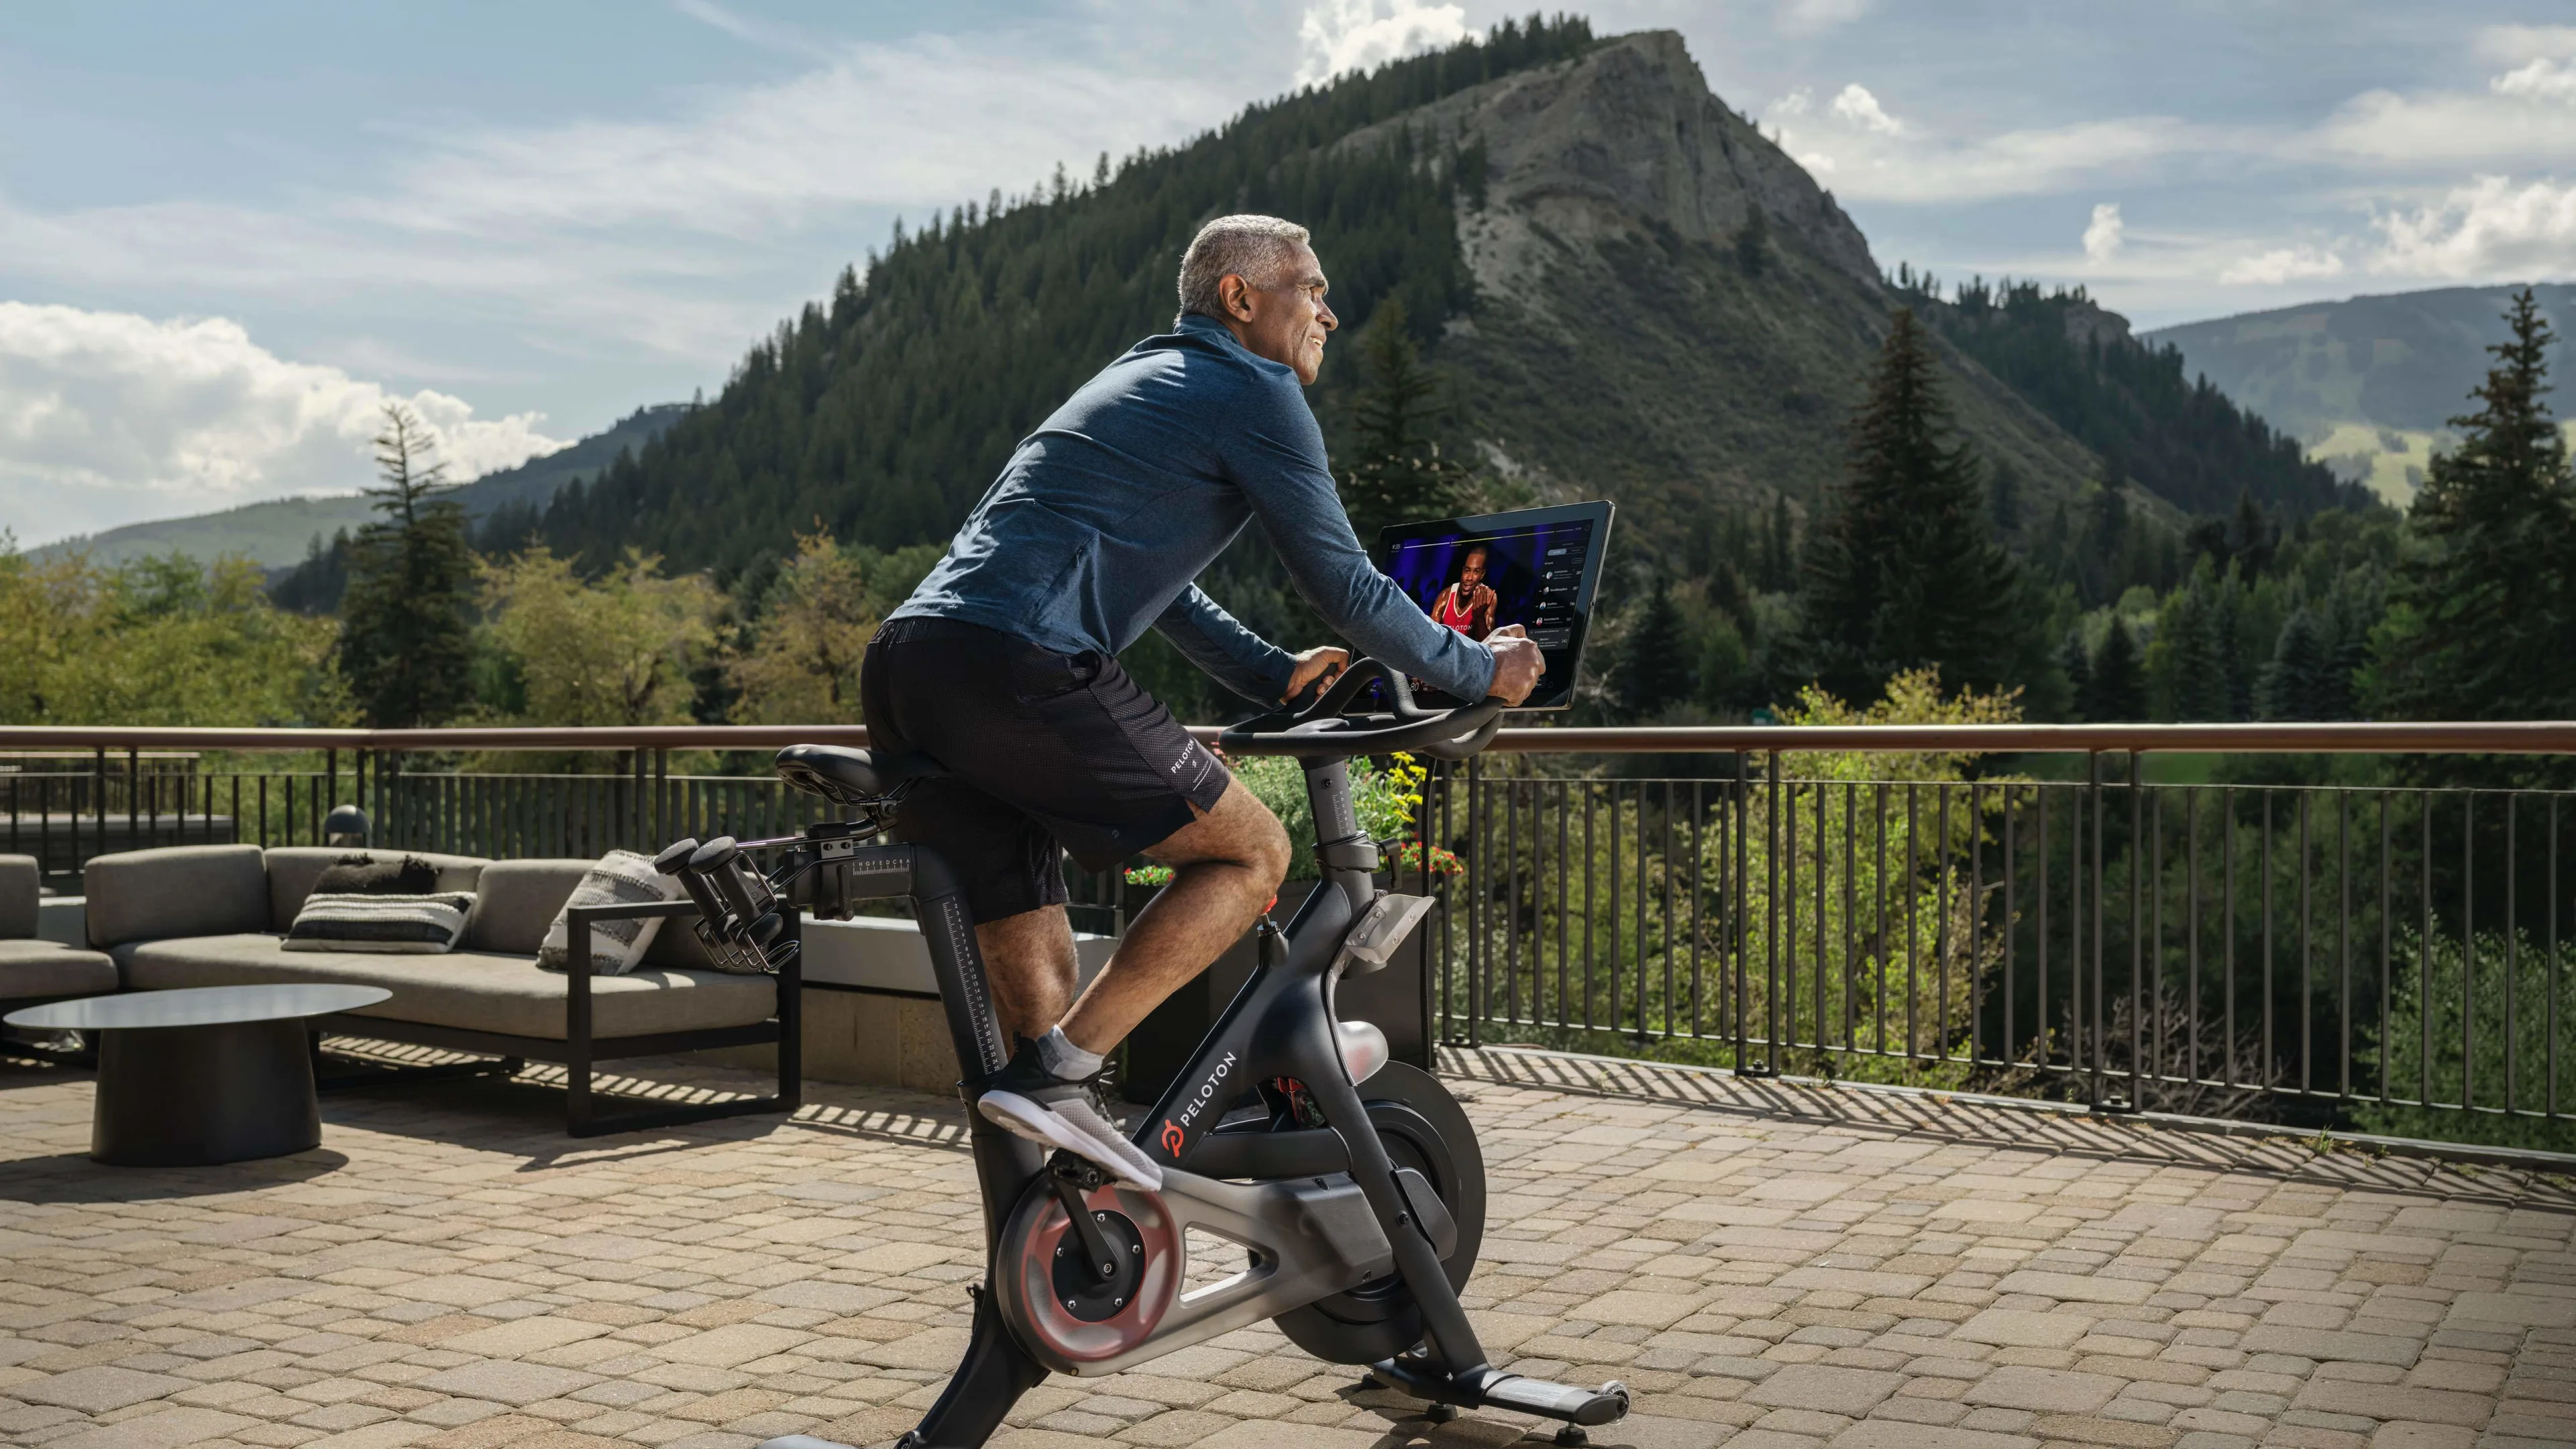 Exerciser using a Peloton stationary bike at a hotel